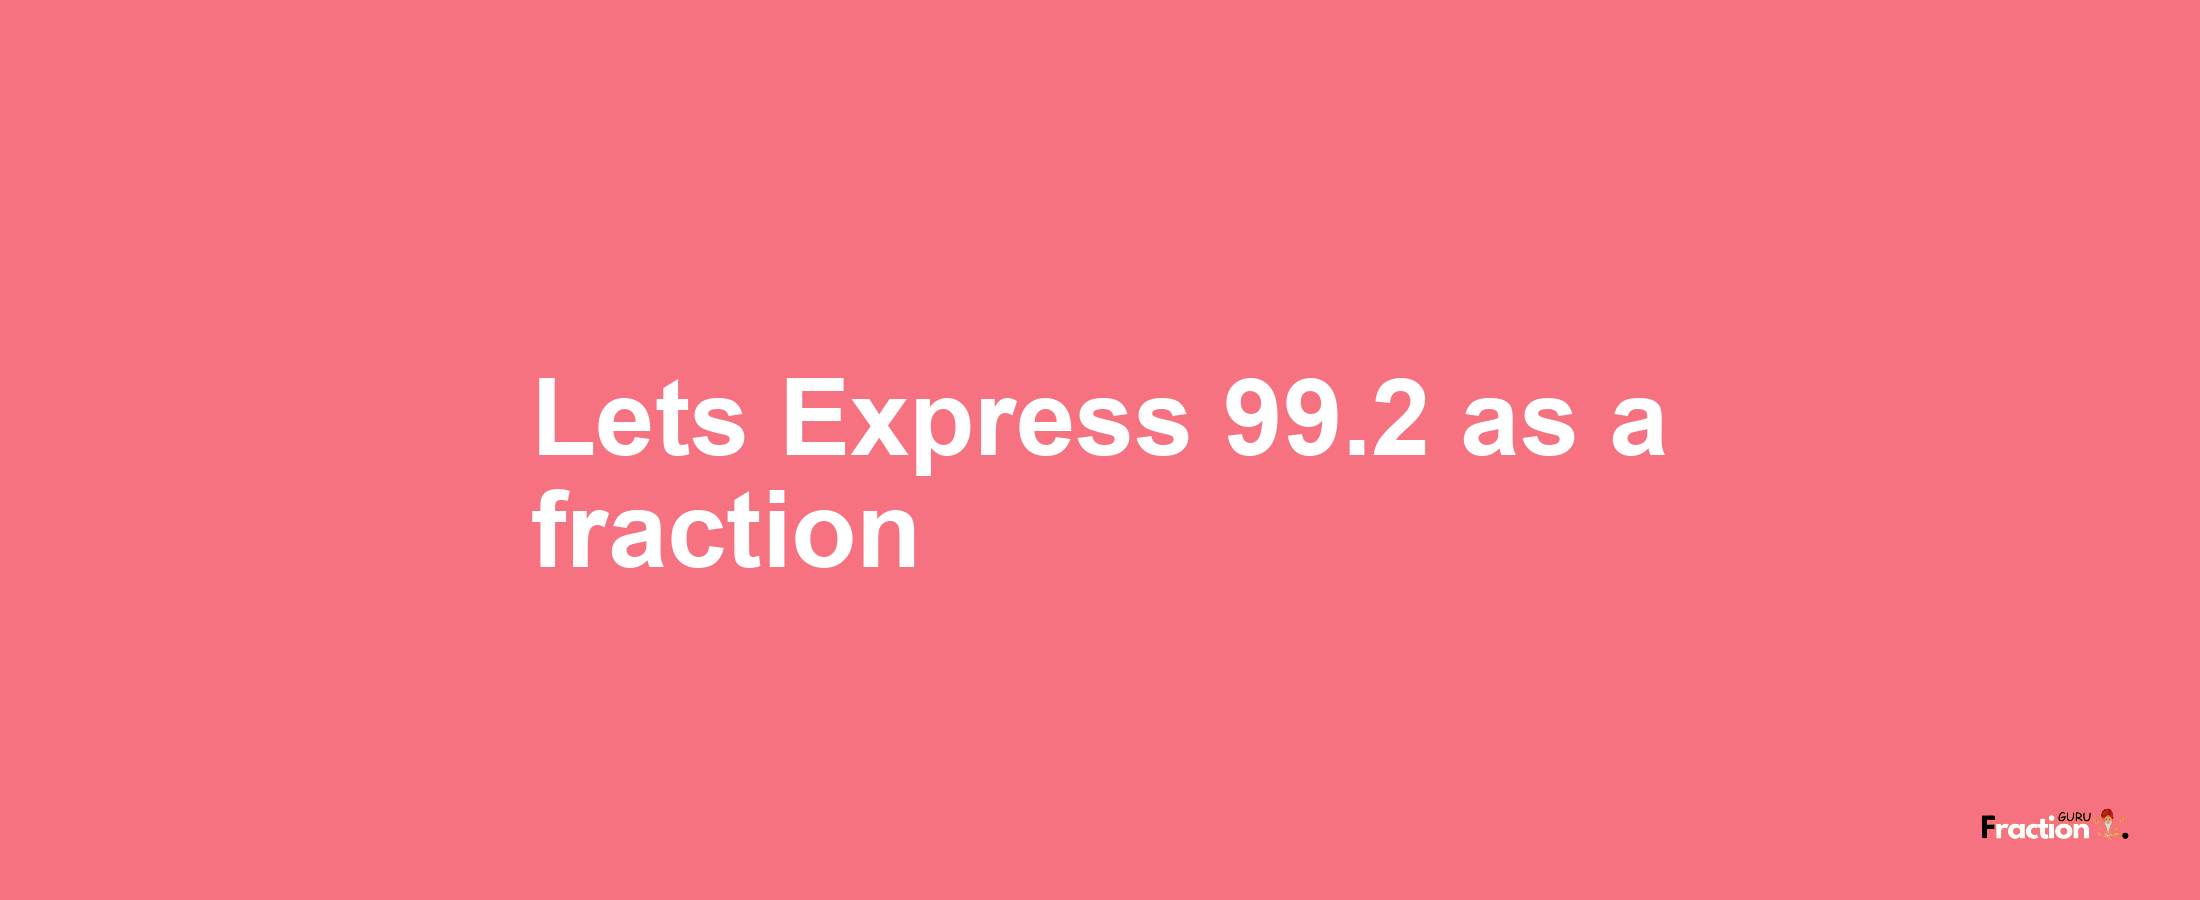 Lets Express 99.2 as afraction